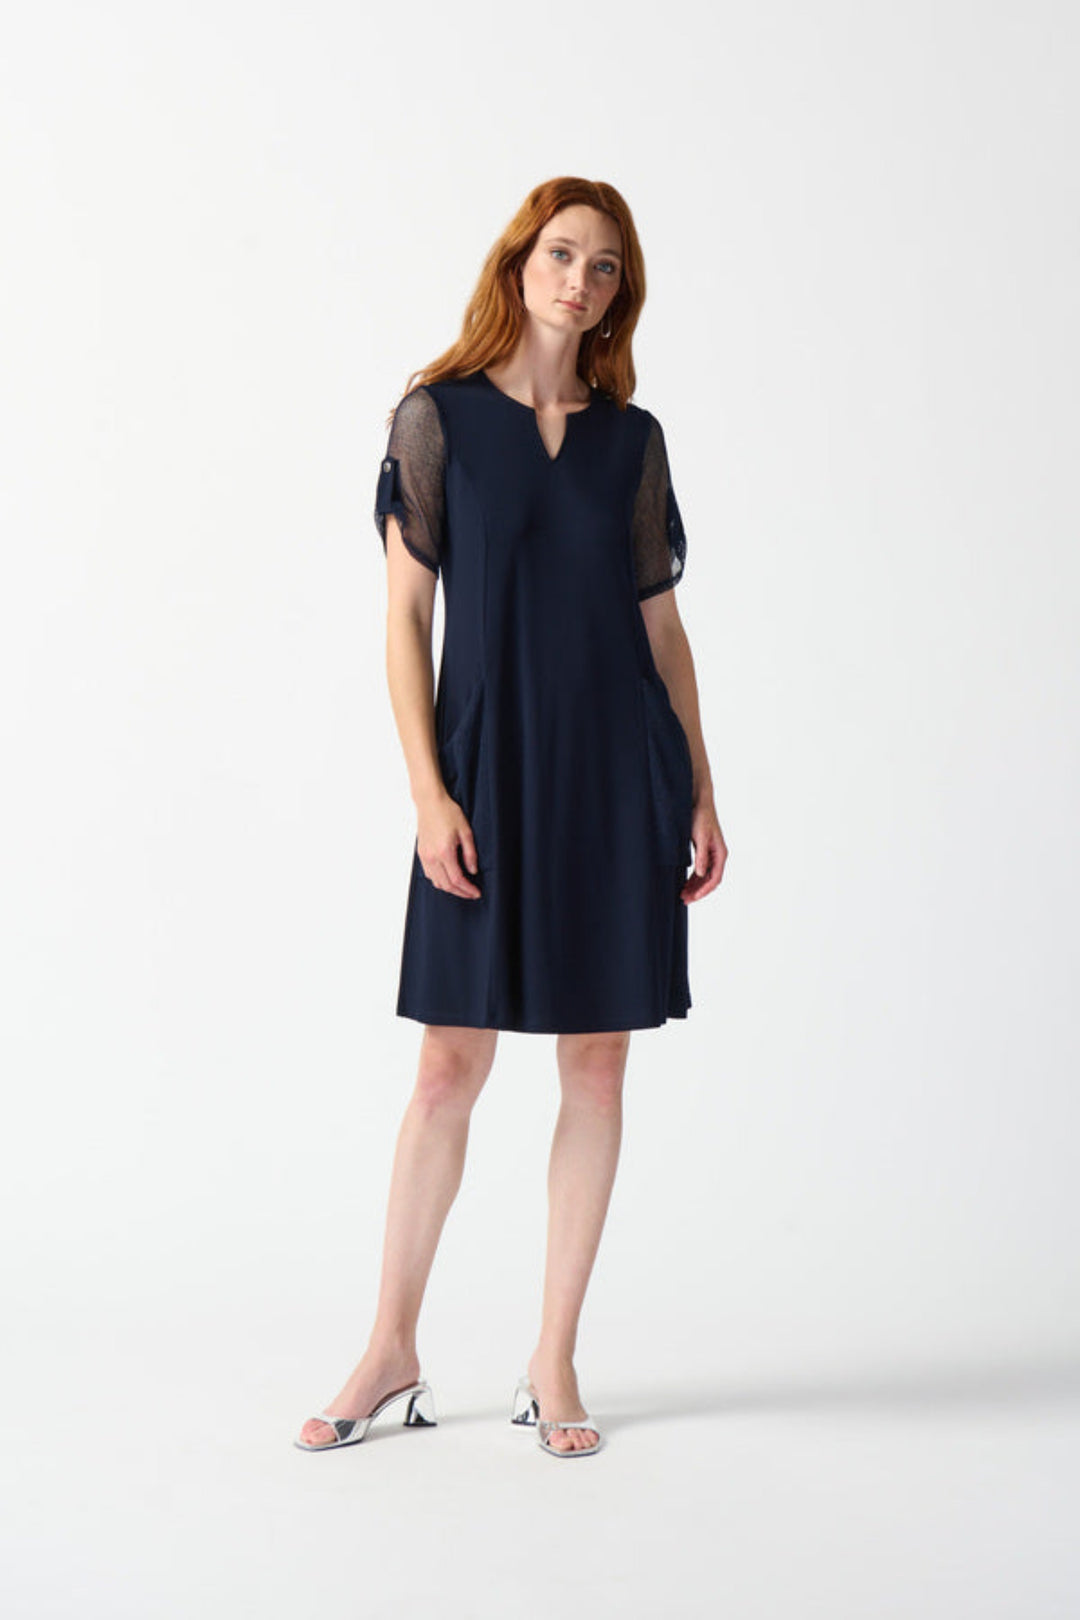 Joseph Ribkoff Summer 2024  The classic A-line silhouette and knee length make it versatile for any occasion, while the sleek mesh fabric on the sleeves adds a touch of sophistication. 